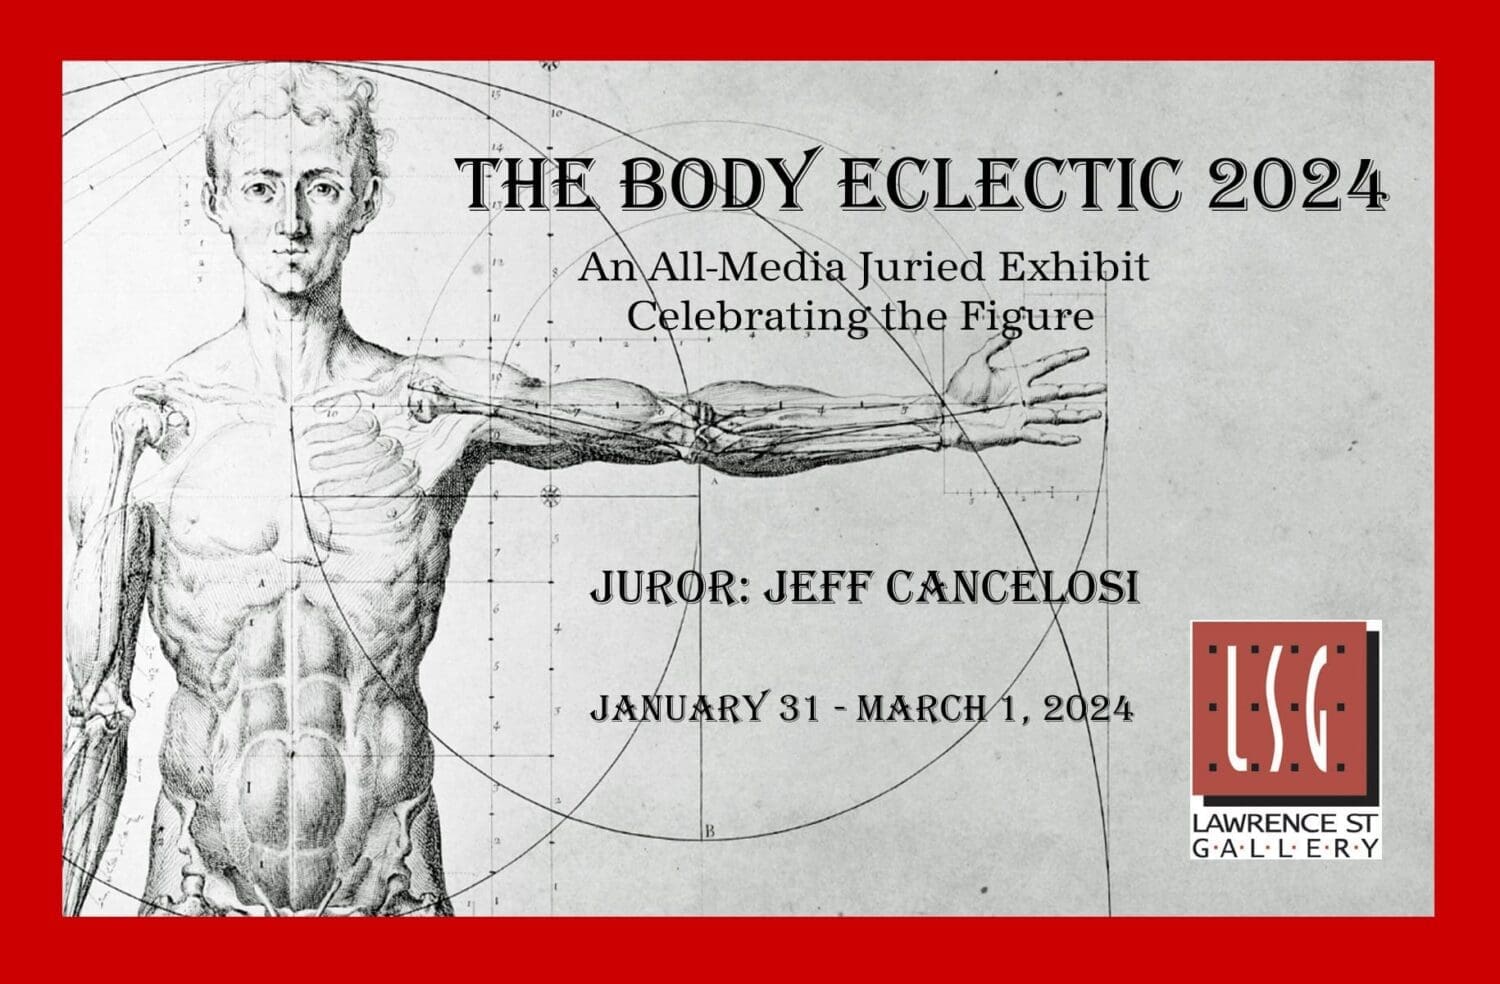 The Body Eclectic 2024